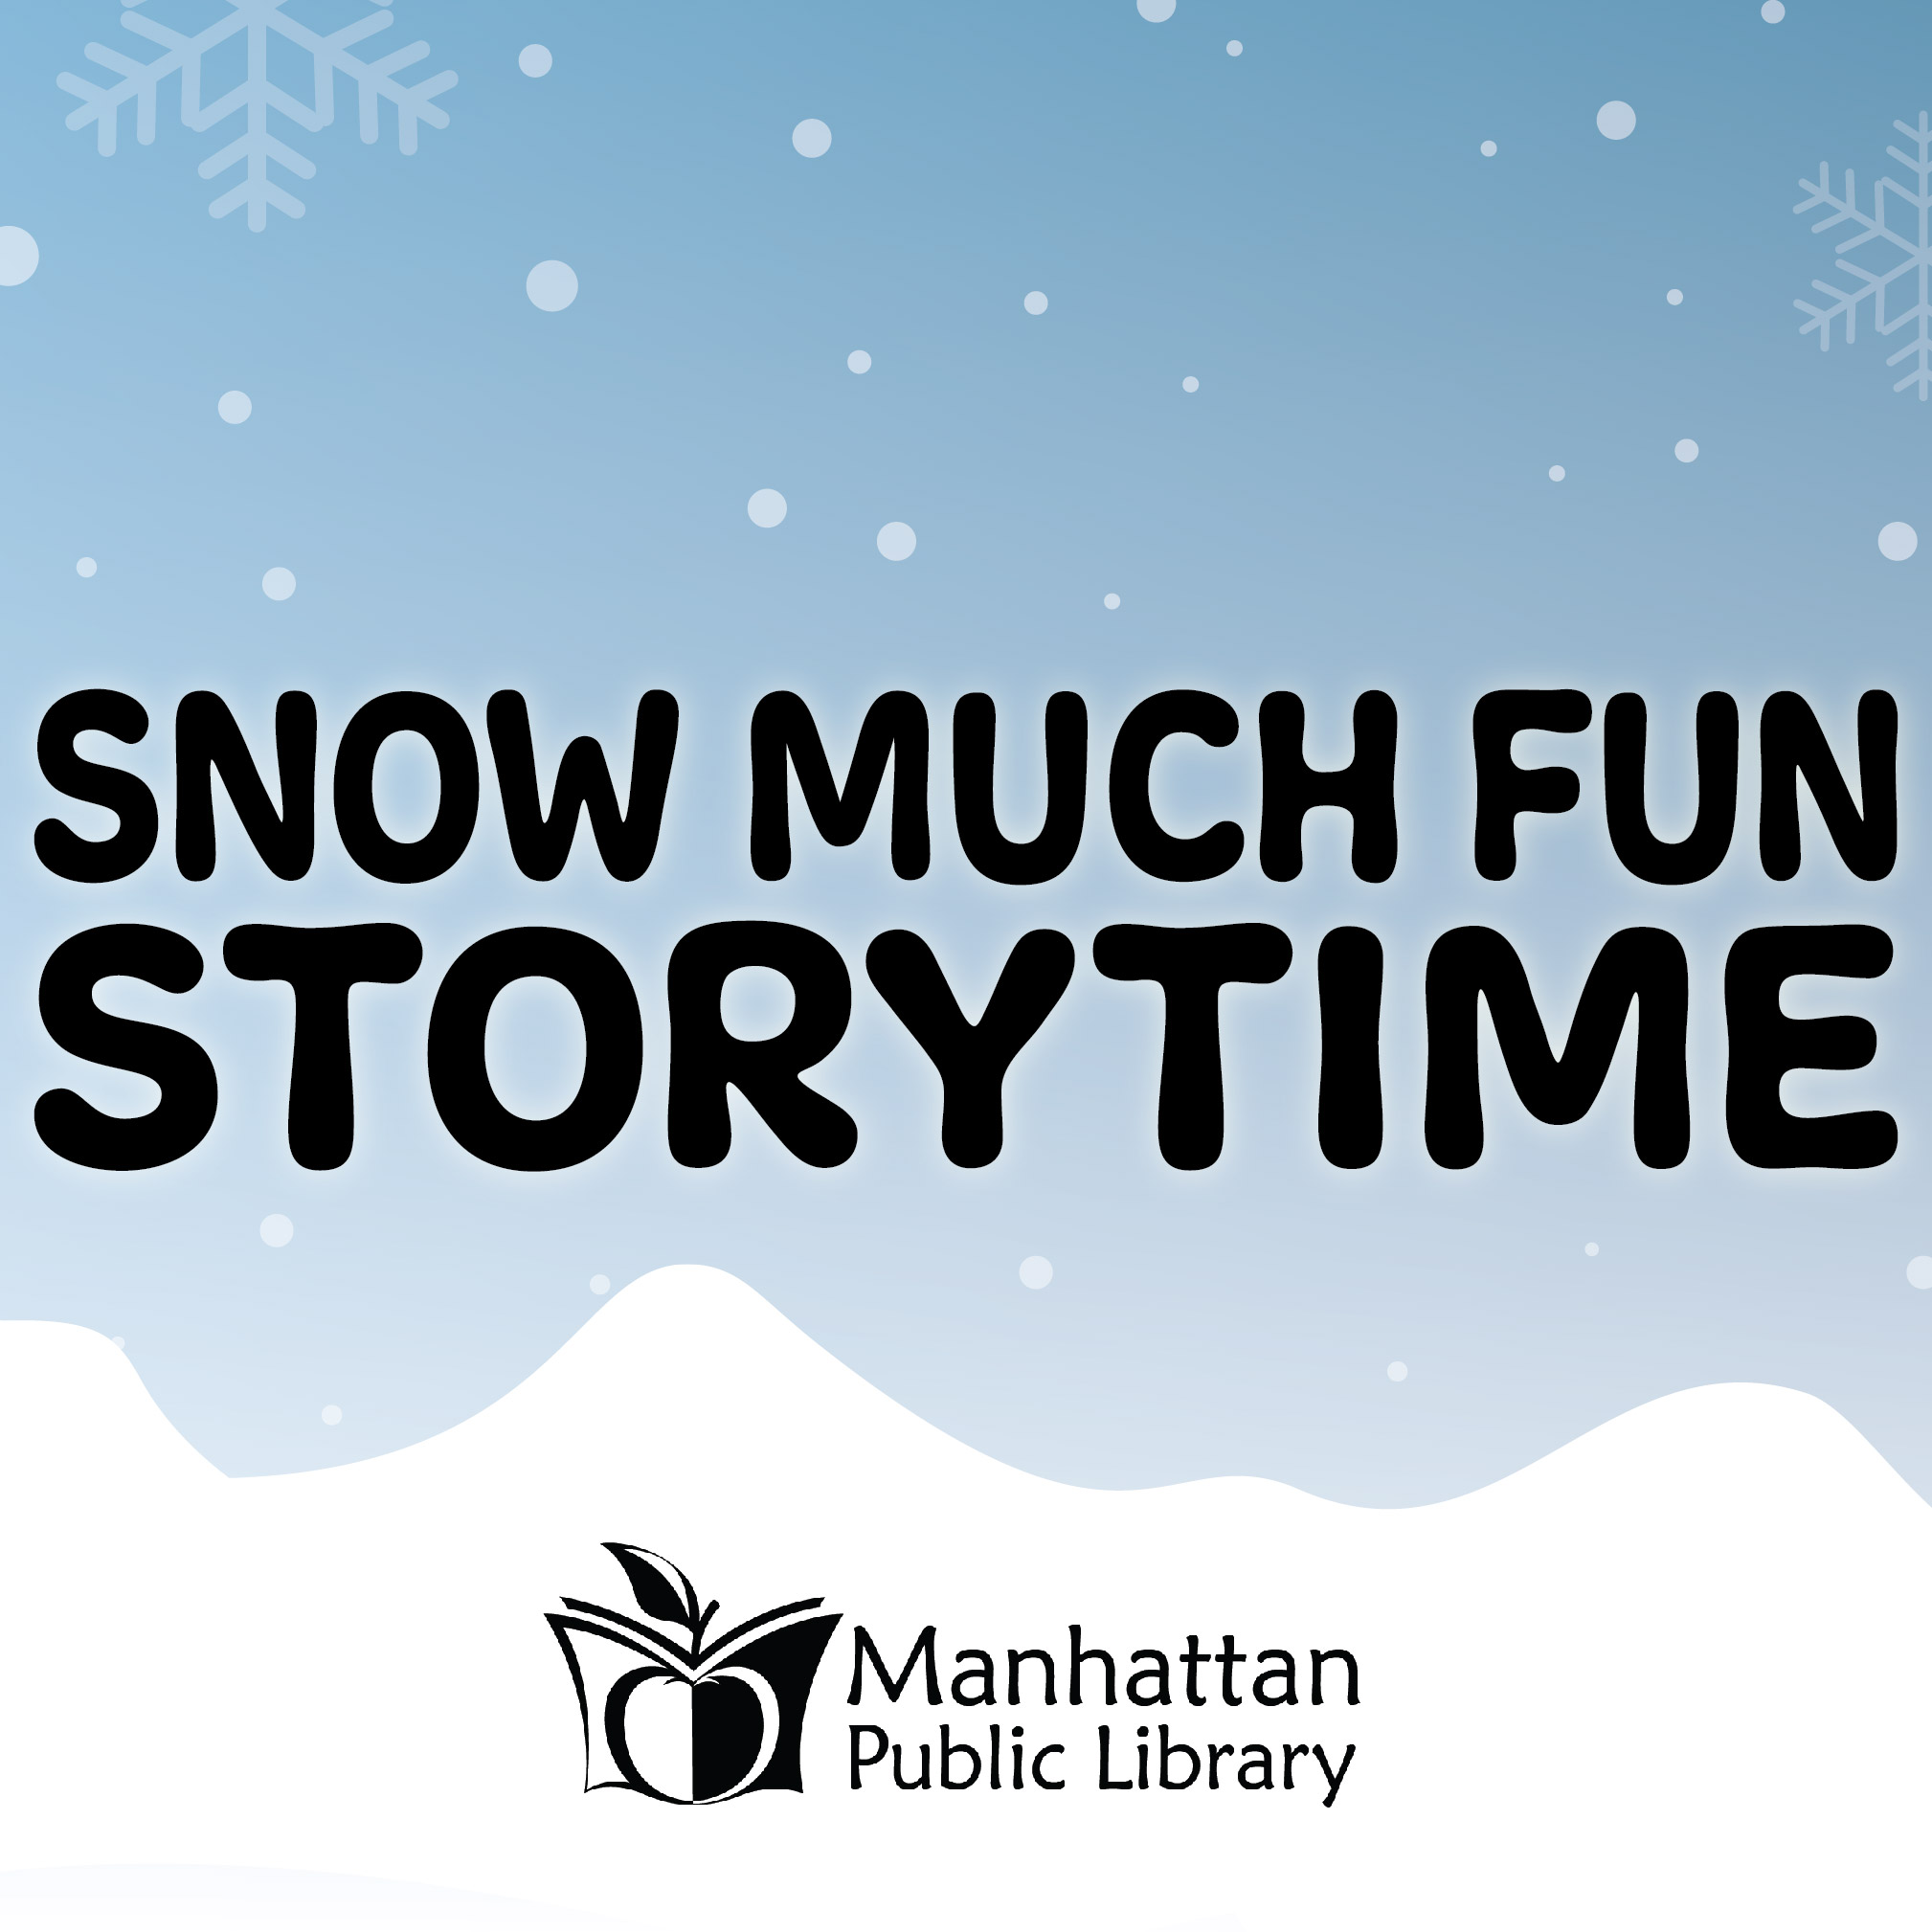 Snow Much Fun Storytime